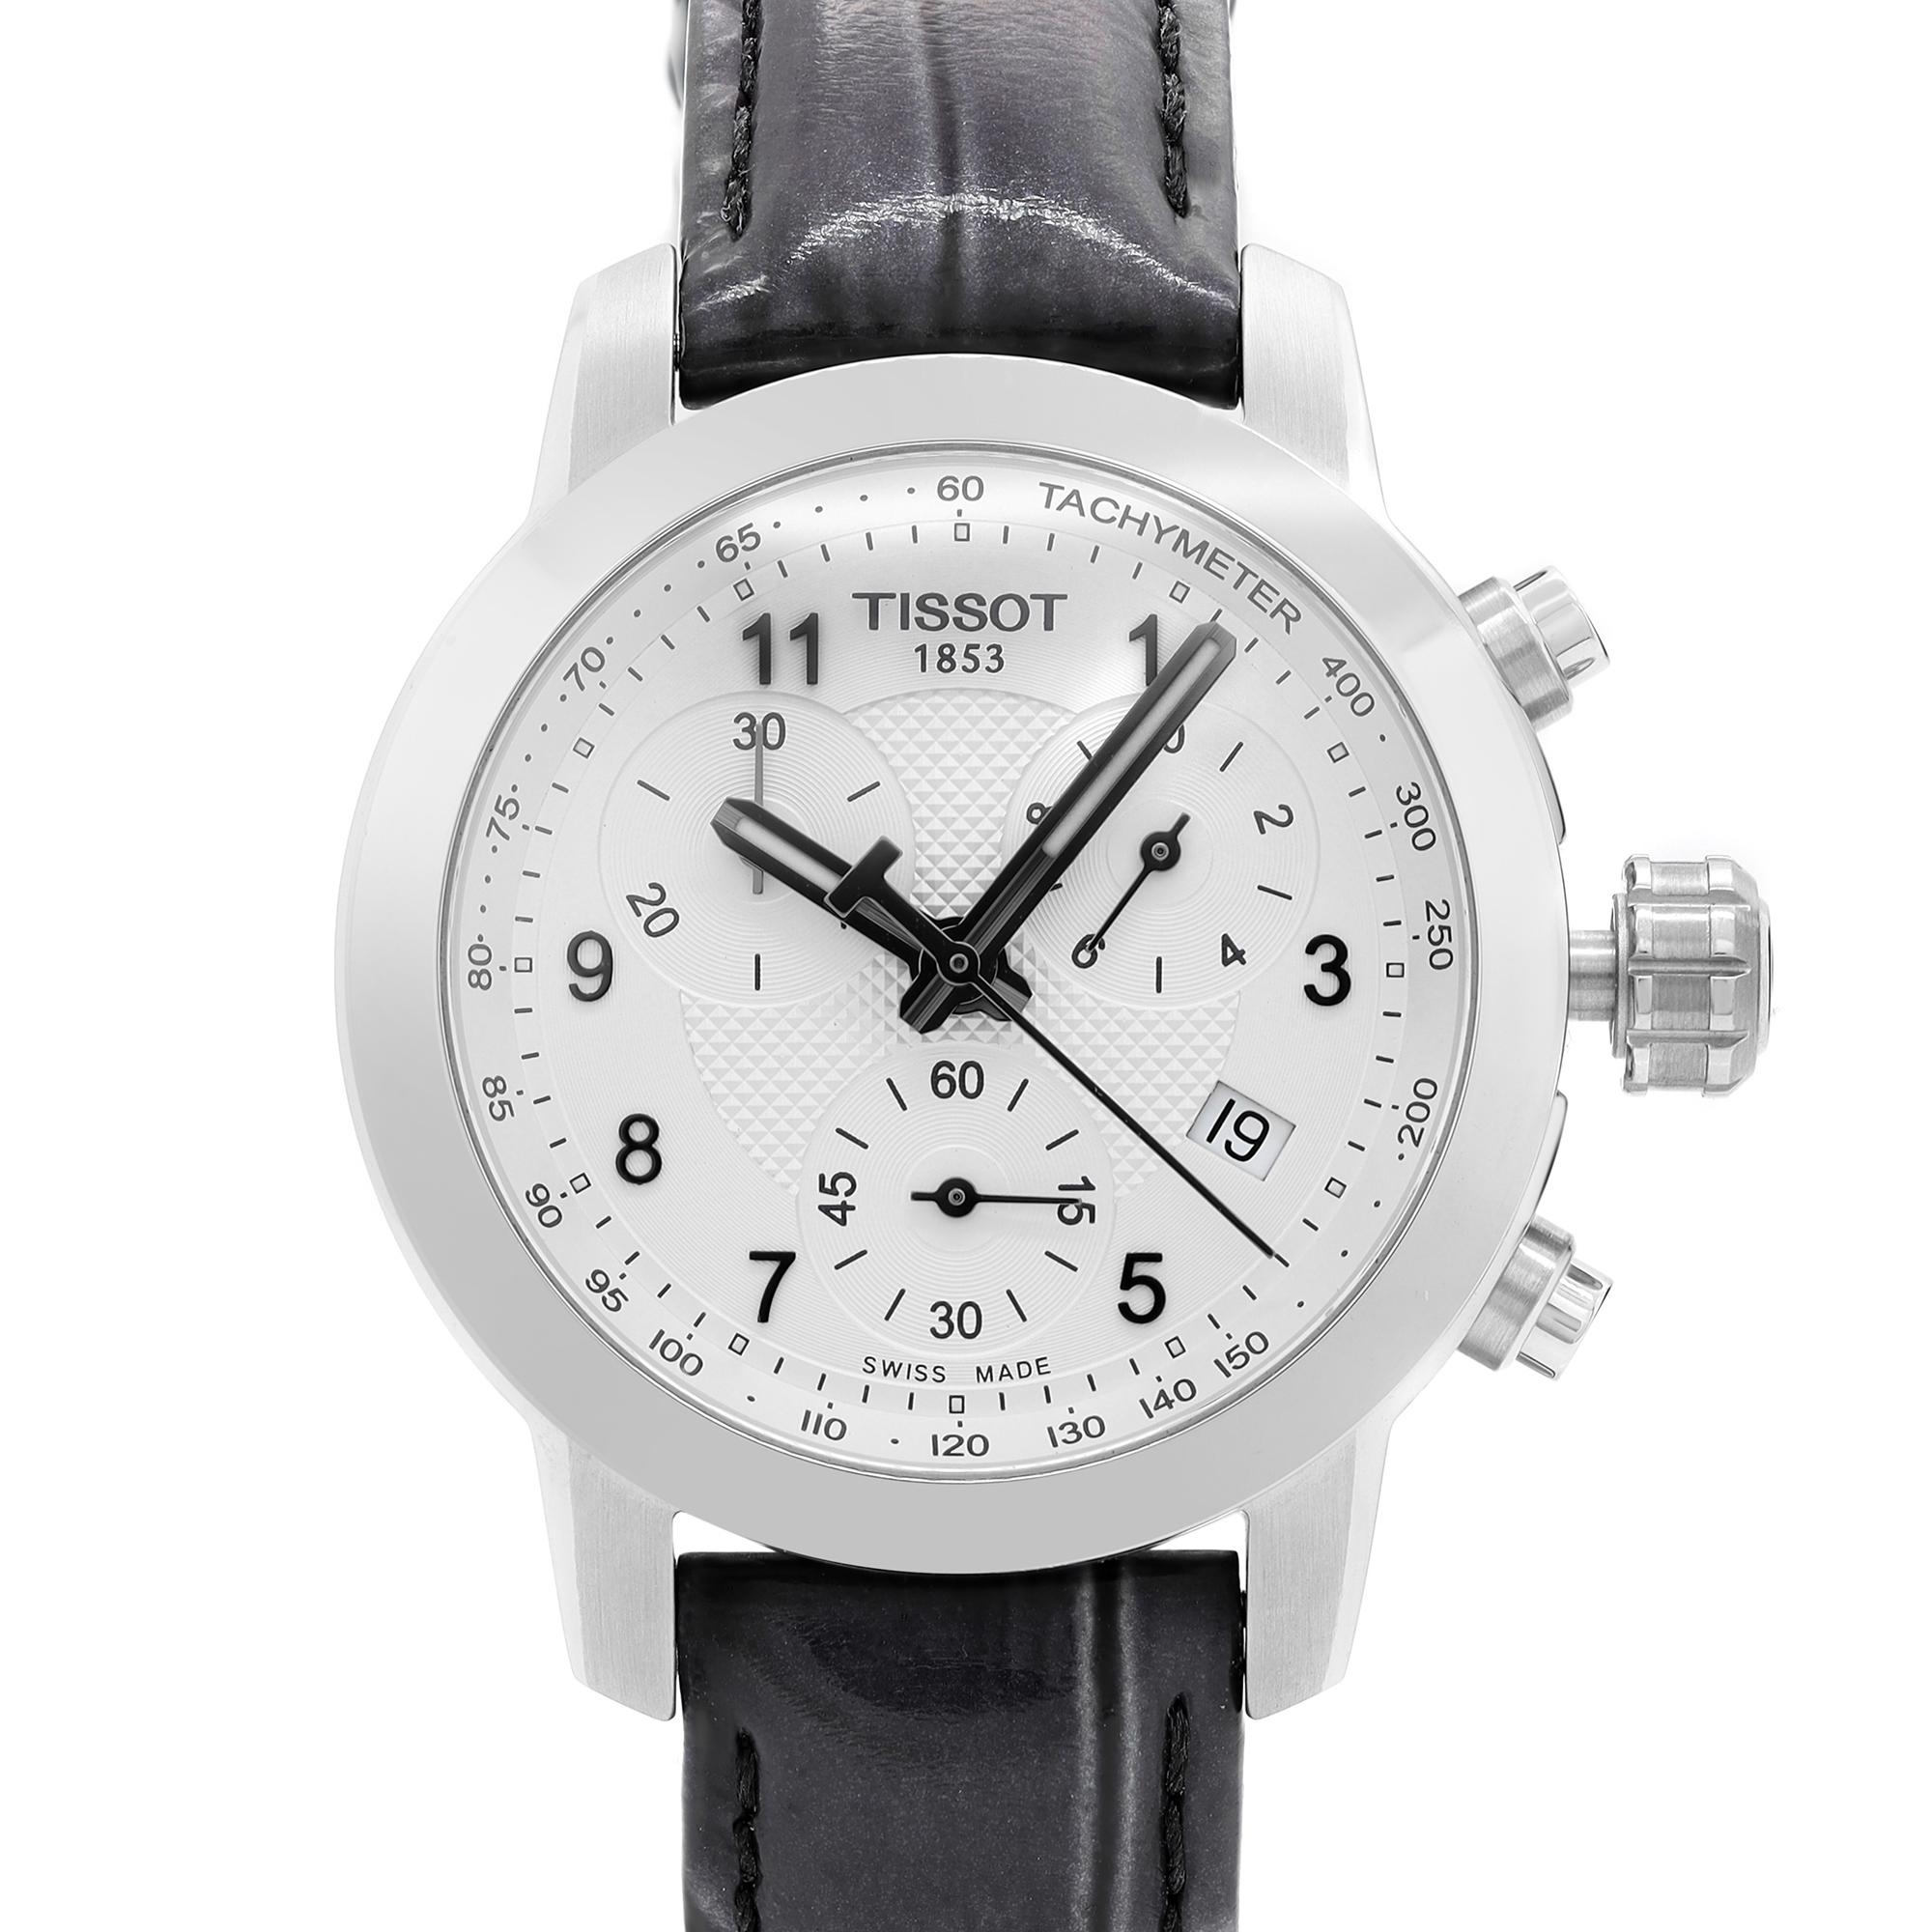 New With Defects Tissot PR200 Chronograph Stainless Steel Silver Dial Ladies Quartz Watch T055.217.16.032.02. Has a small dent and micro-scratches on the bezel, and the band has dry insignificant cracks on the inner side due to aging. 

This